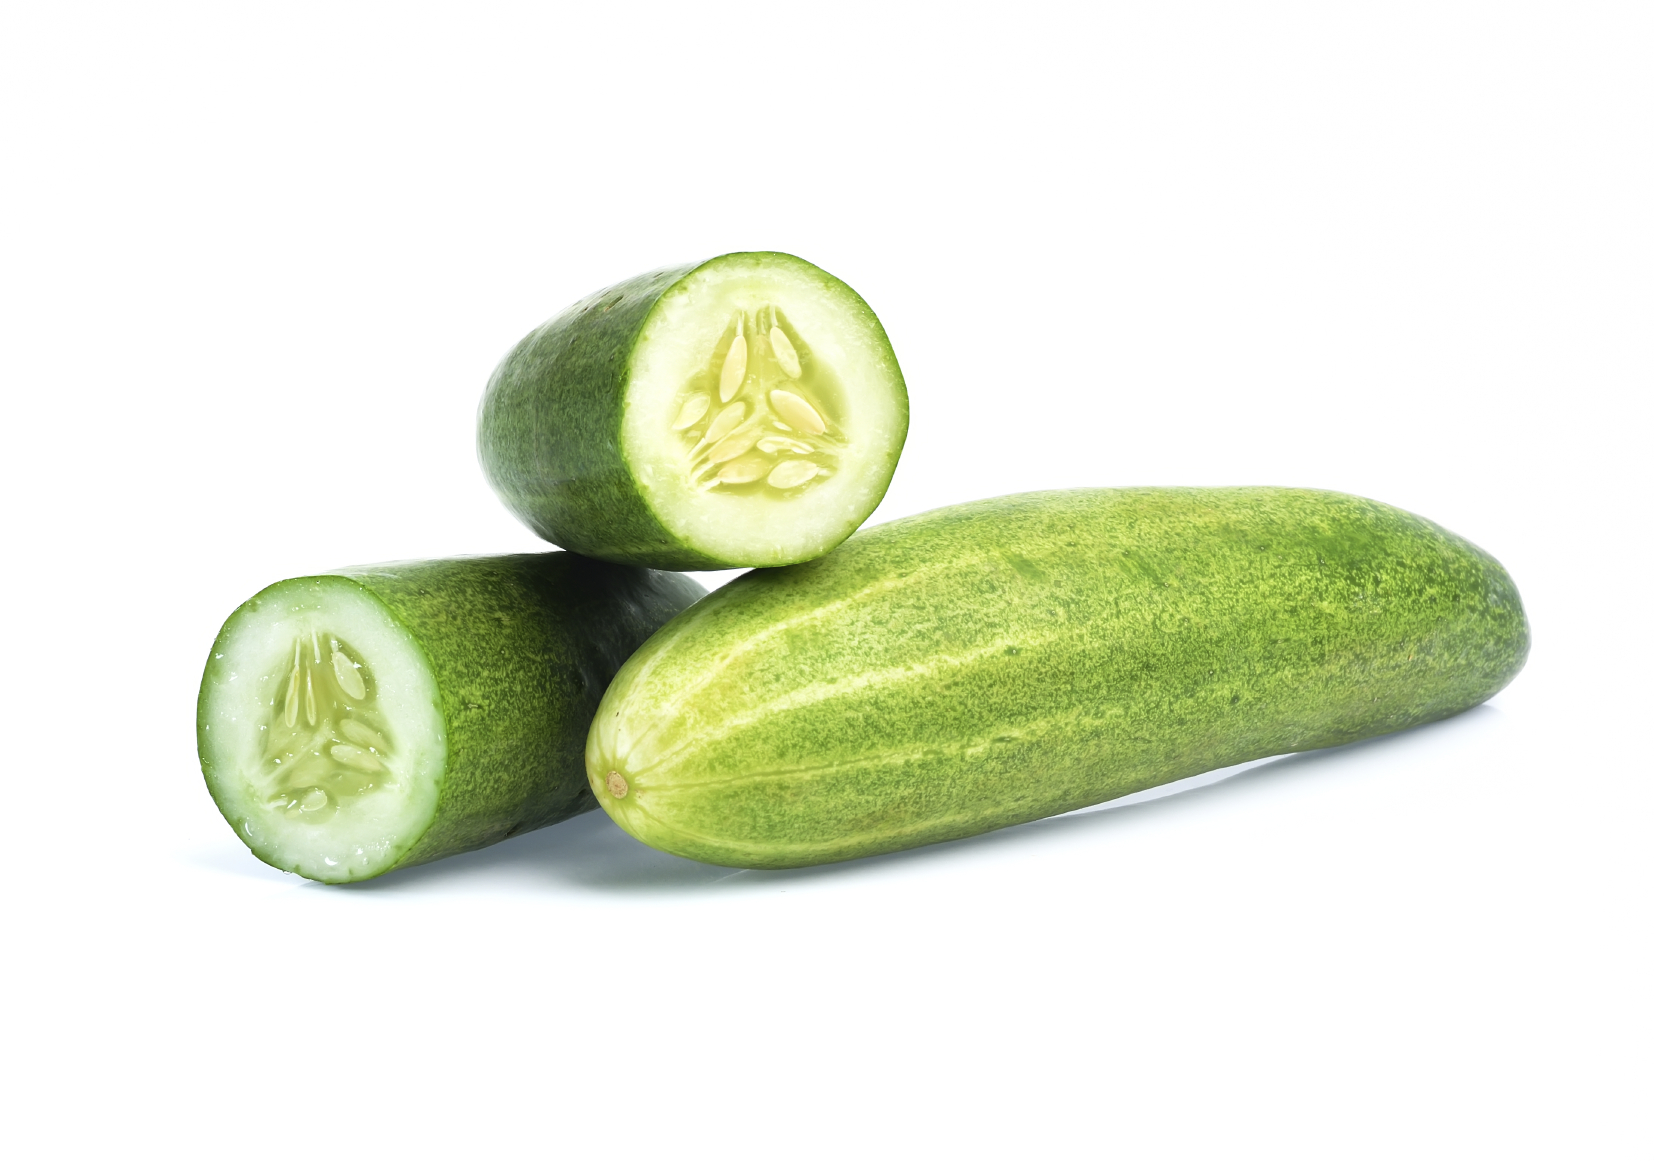 Cucumbers have some serious—and unexpected—health benefits. Here are five of them.